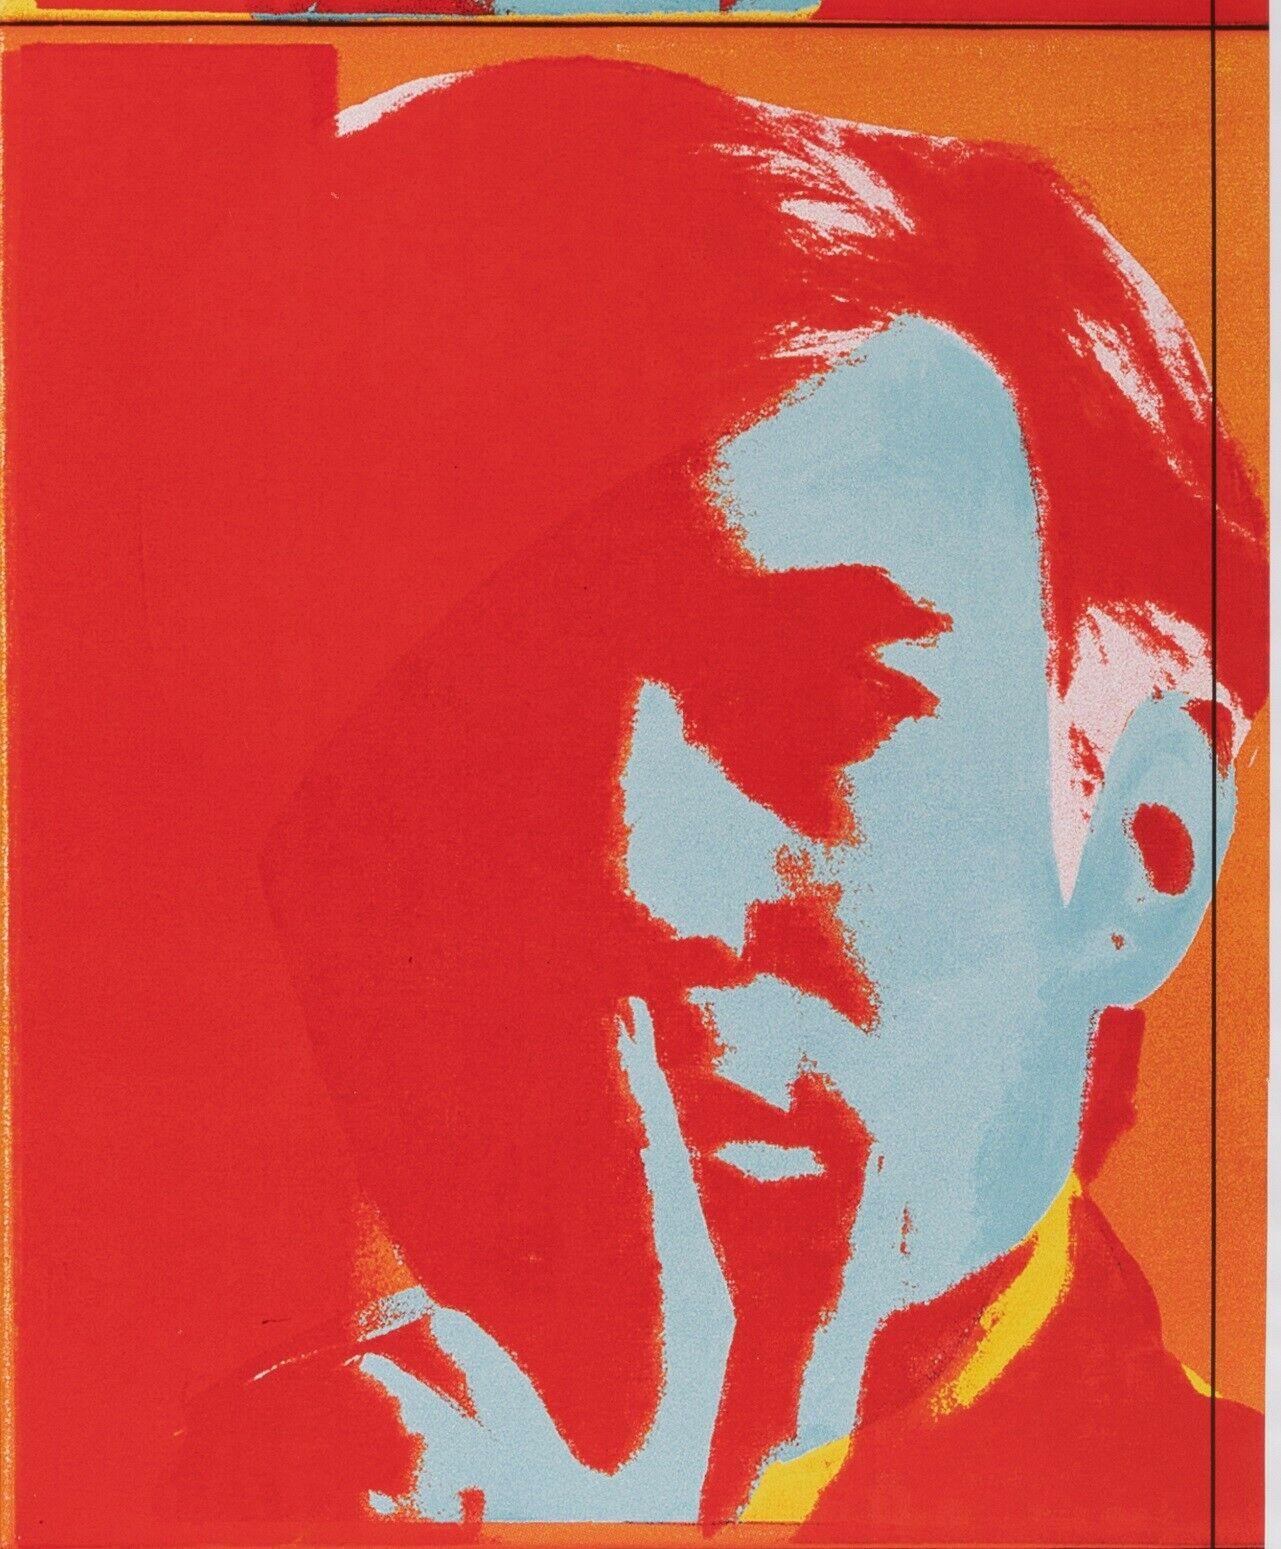 Original Poster-Andy Warhol-Warhol Unlimited-Museum Modern Art, 2015

Poster Advertising for an exhibition at the Museum of Modern Art of the City of Paris. This poster is taken from the famous Self-portrait of 1966 made in silk-screen printing,